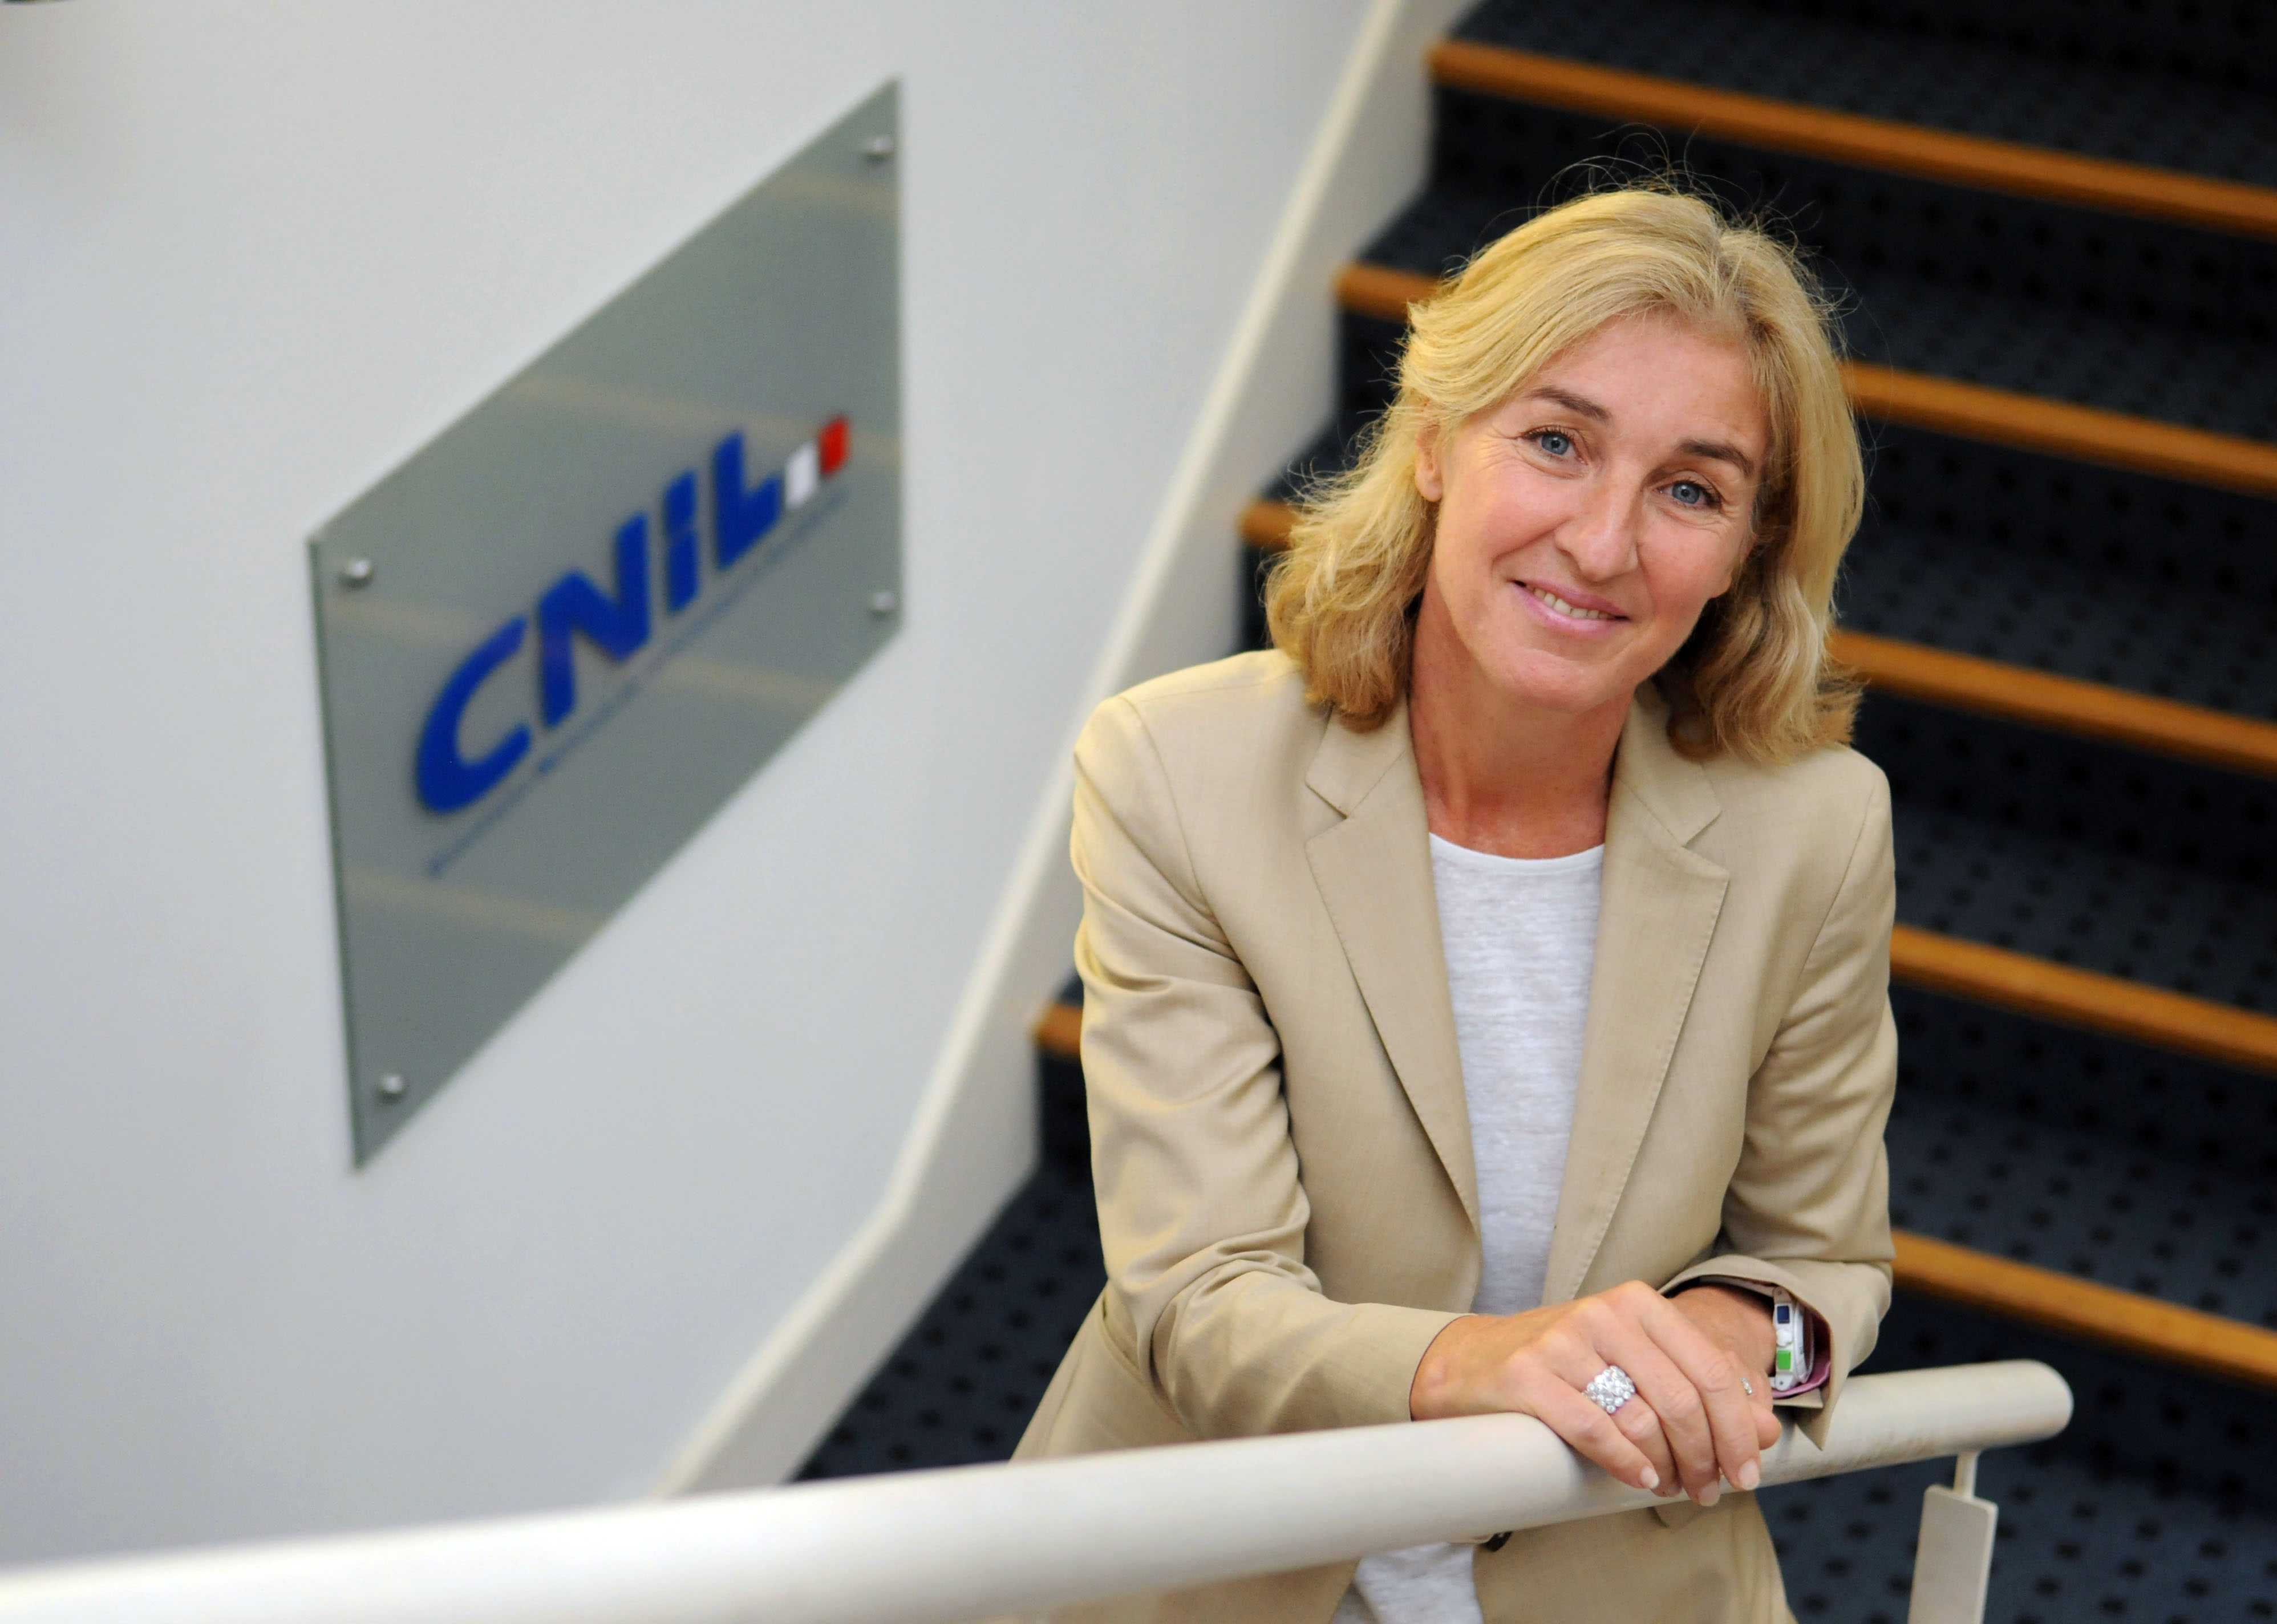 Isabelle Falque-Pierrotin, Chairman of CNIL